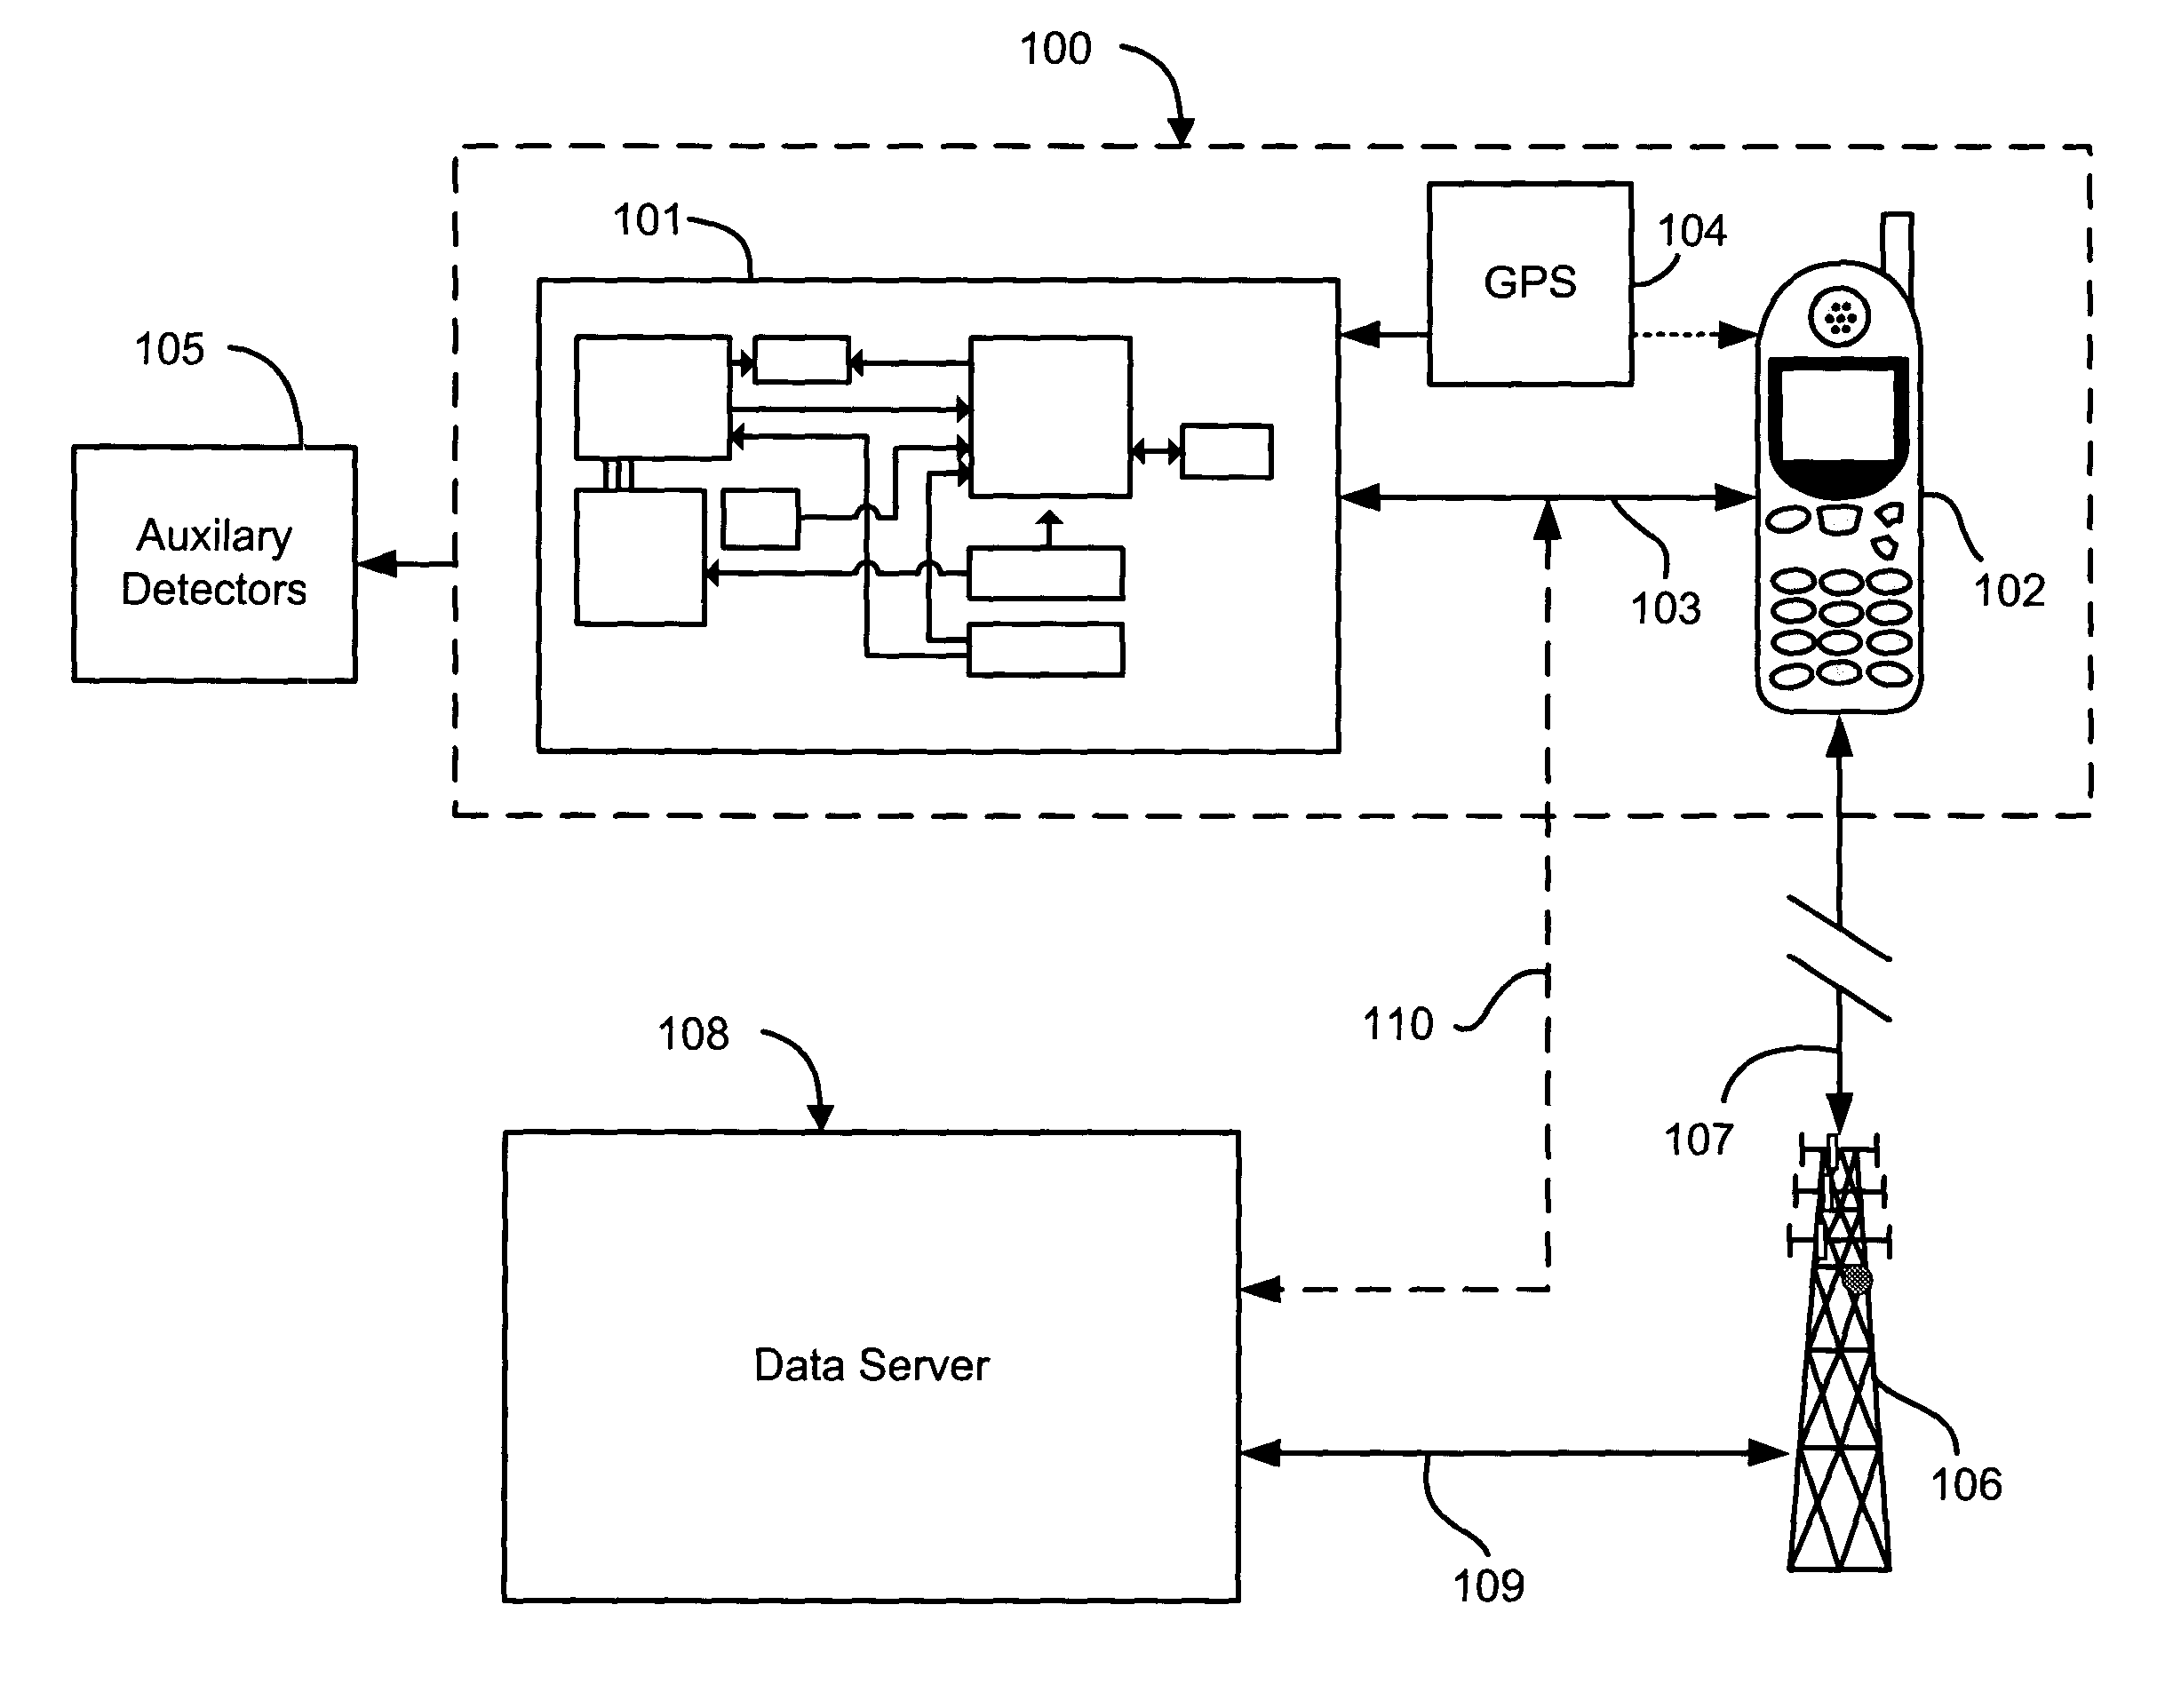 Cellular telephone-based radiation sensor and wide-area detection network